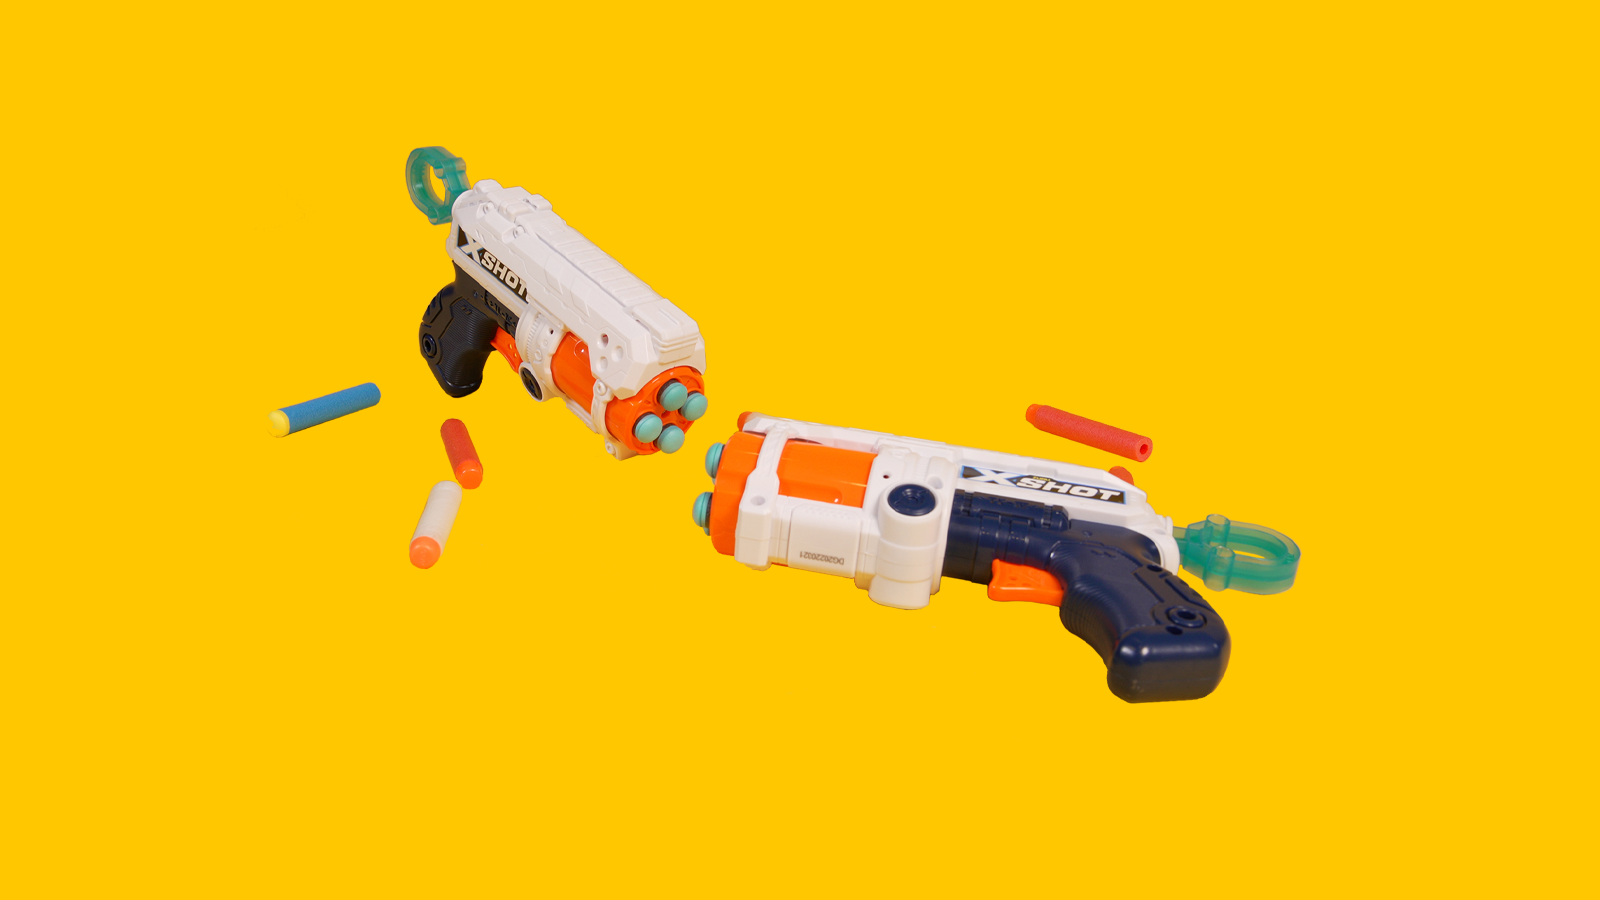 Build and Blast Away with NERF Strike on Roblox - The Toy Insider